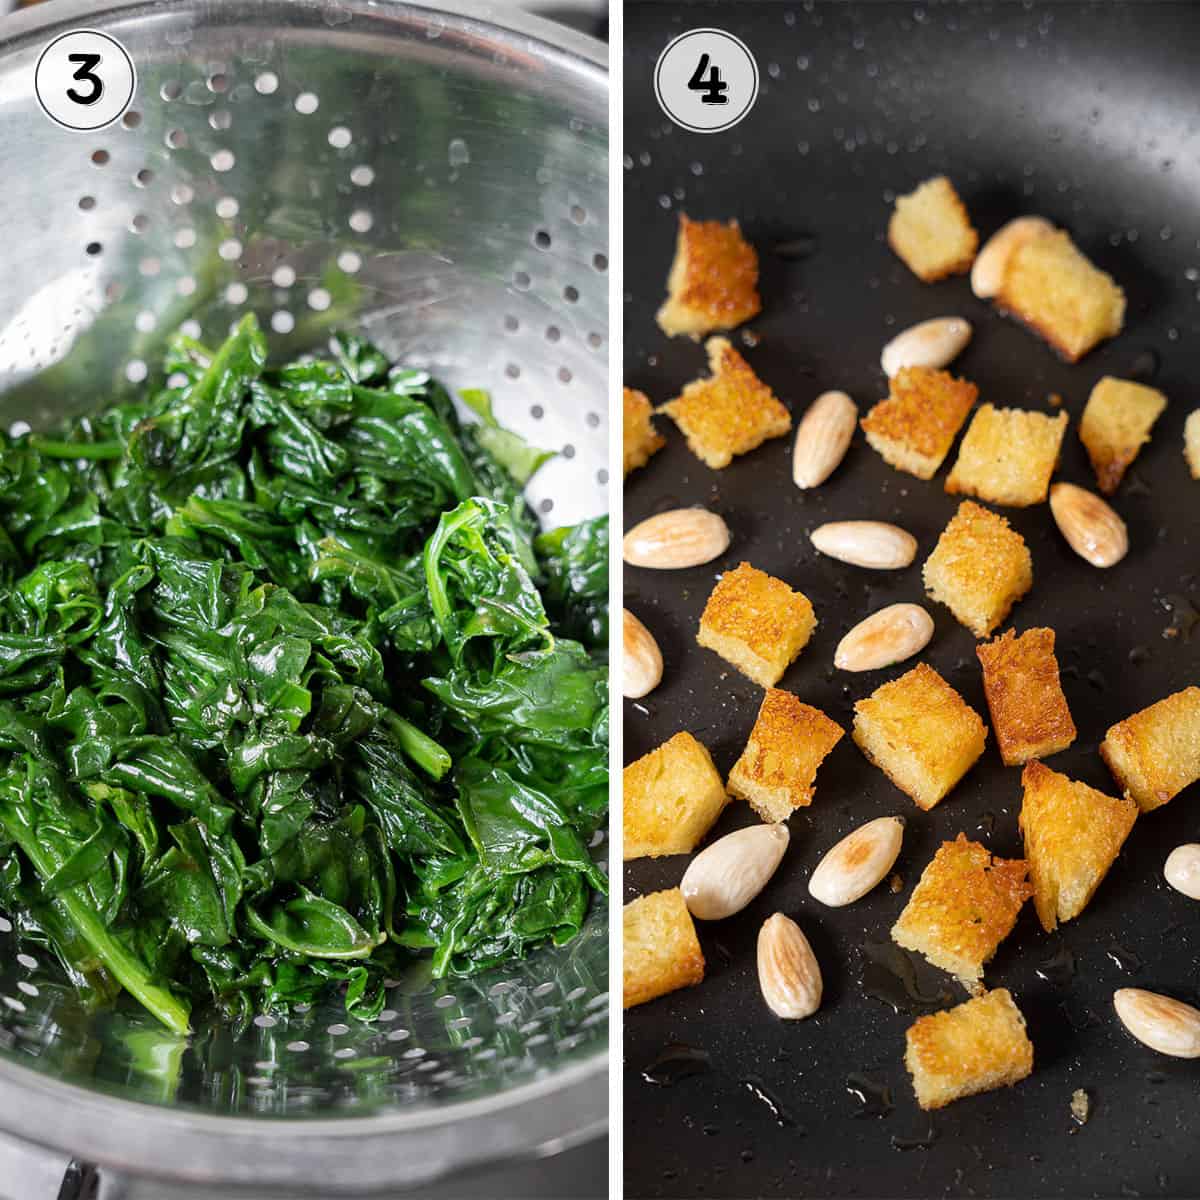 draining wilted spinach in a colander and toasting bread cubes and almonds in a skillet.